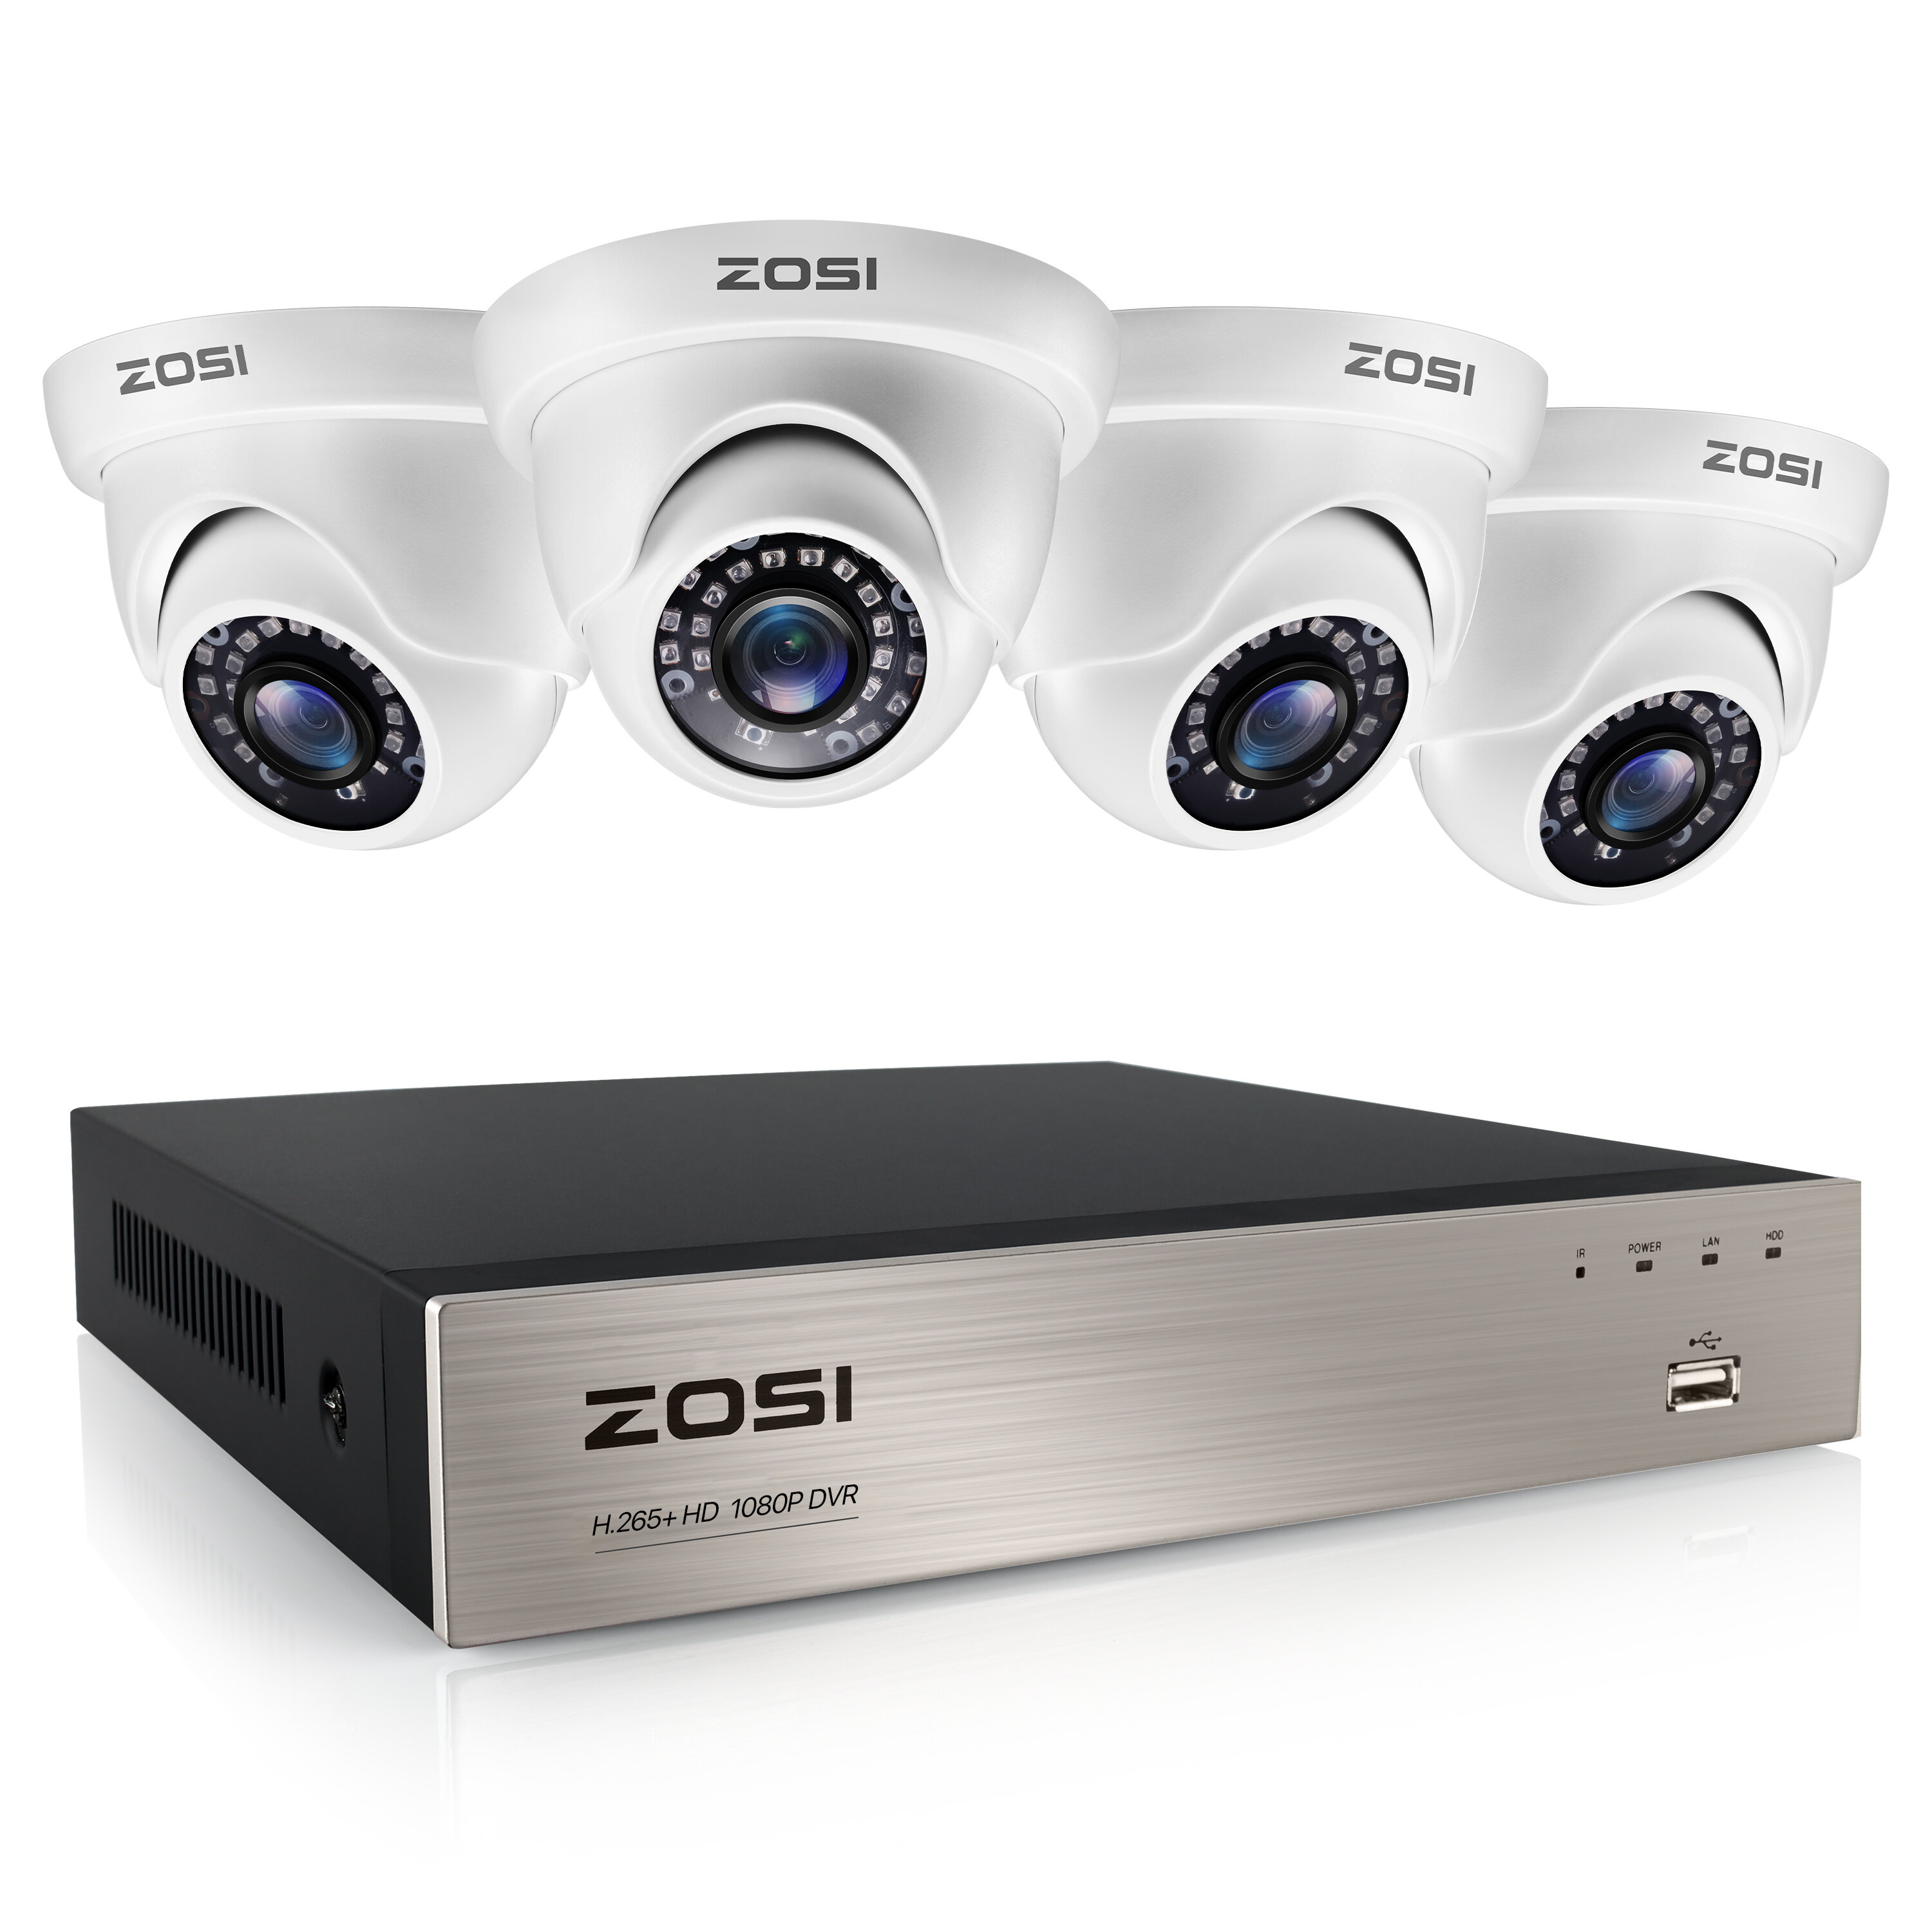 ZOSI H.265 No Hard Drive Full 1080p Home Security Camera System,5MP Lite CCTV DVR Recorder 4 Channel and 4 x 2MP 1080P Weatherproof Surveillance Dome Camera Outdoor Indoor with 80ft Night Vision 